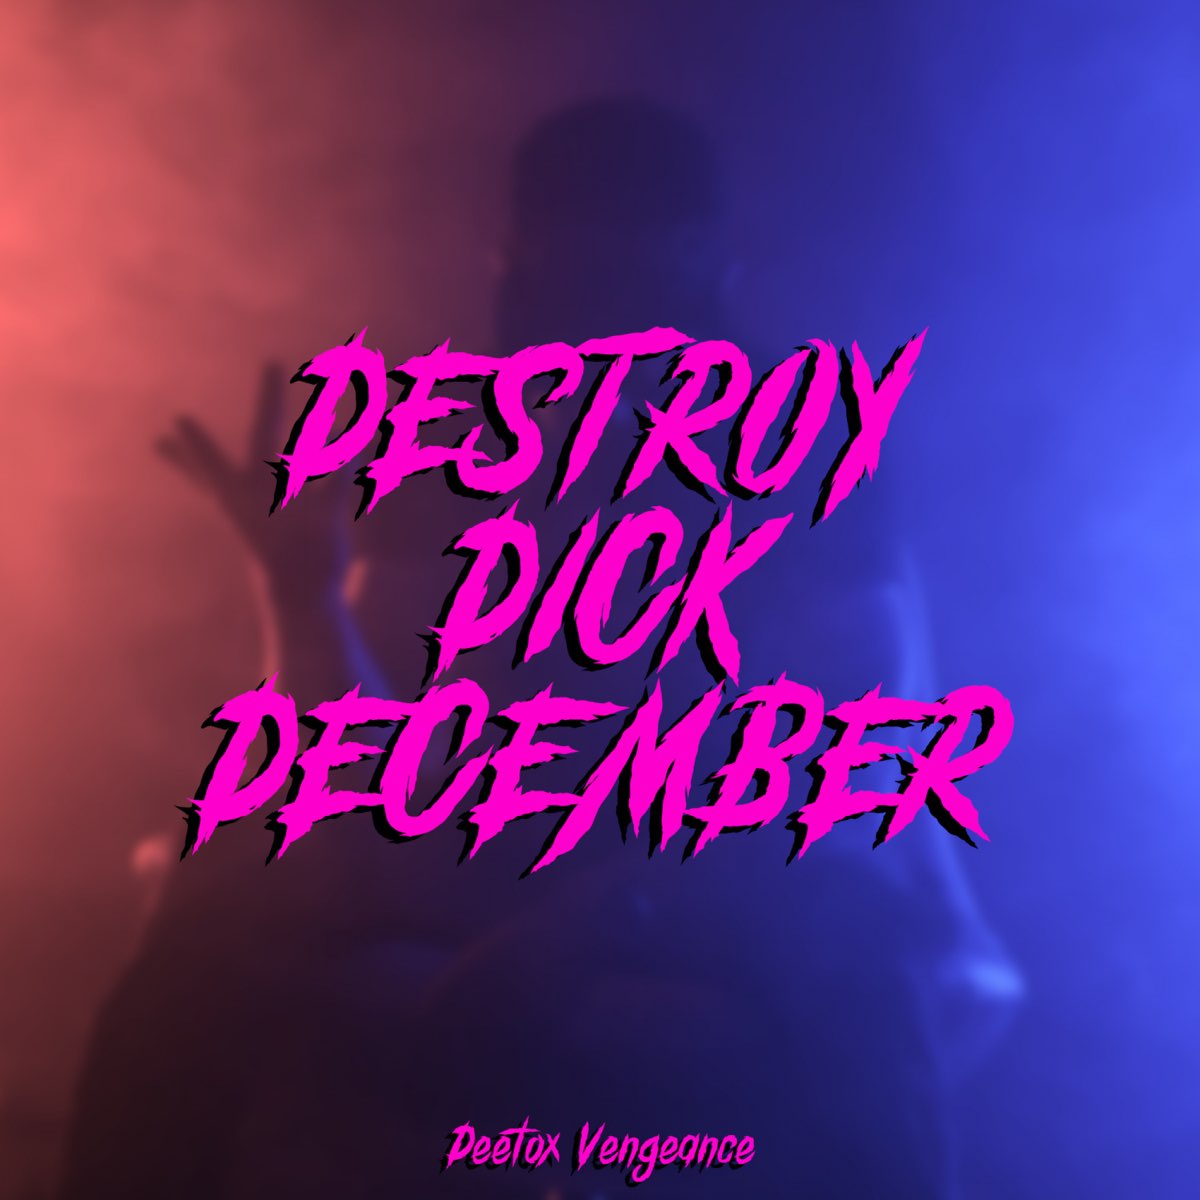 What is destroy dick december